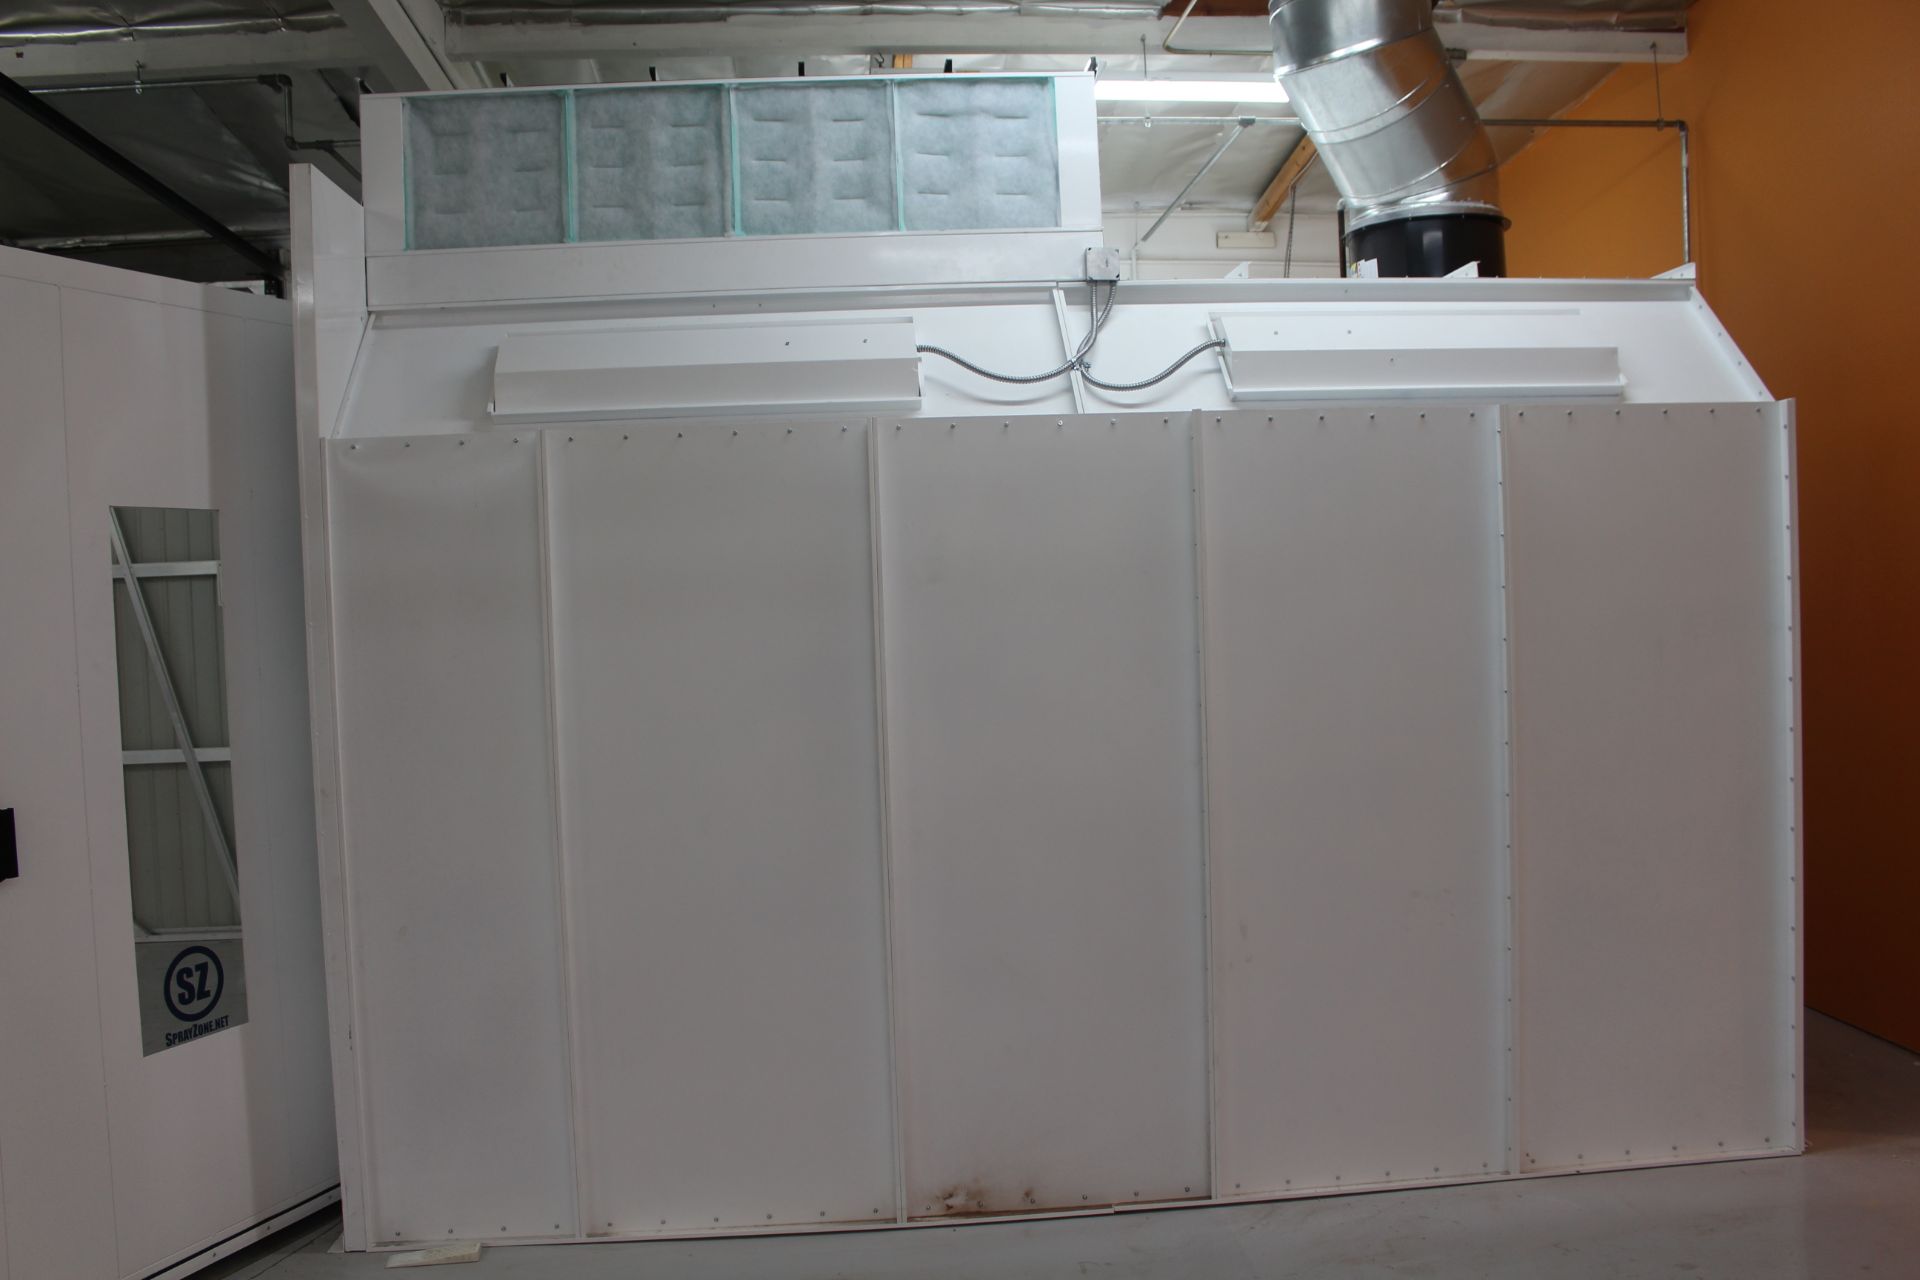 SPRAY ZONE PAINT SPRAY BOOTH, BRAND NEW, 169" LONG X 143" WIDE INSIDE DIMENSION - Image 10 of 15